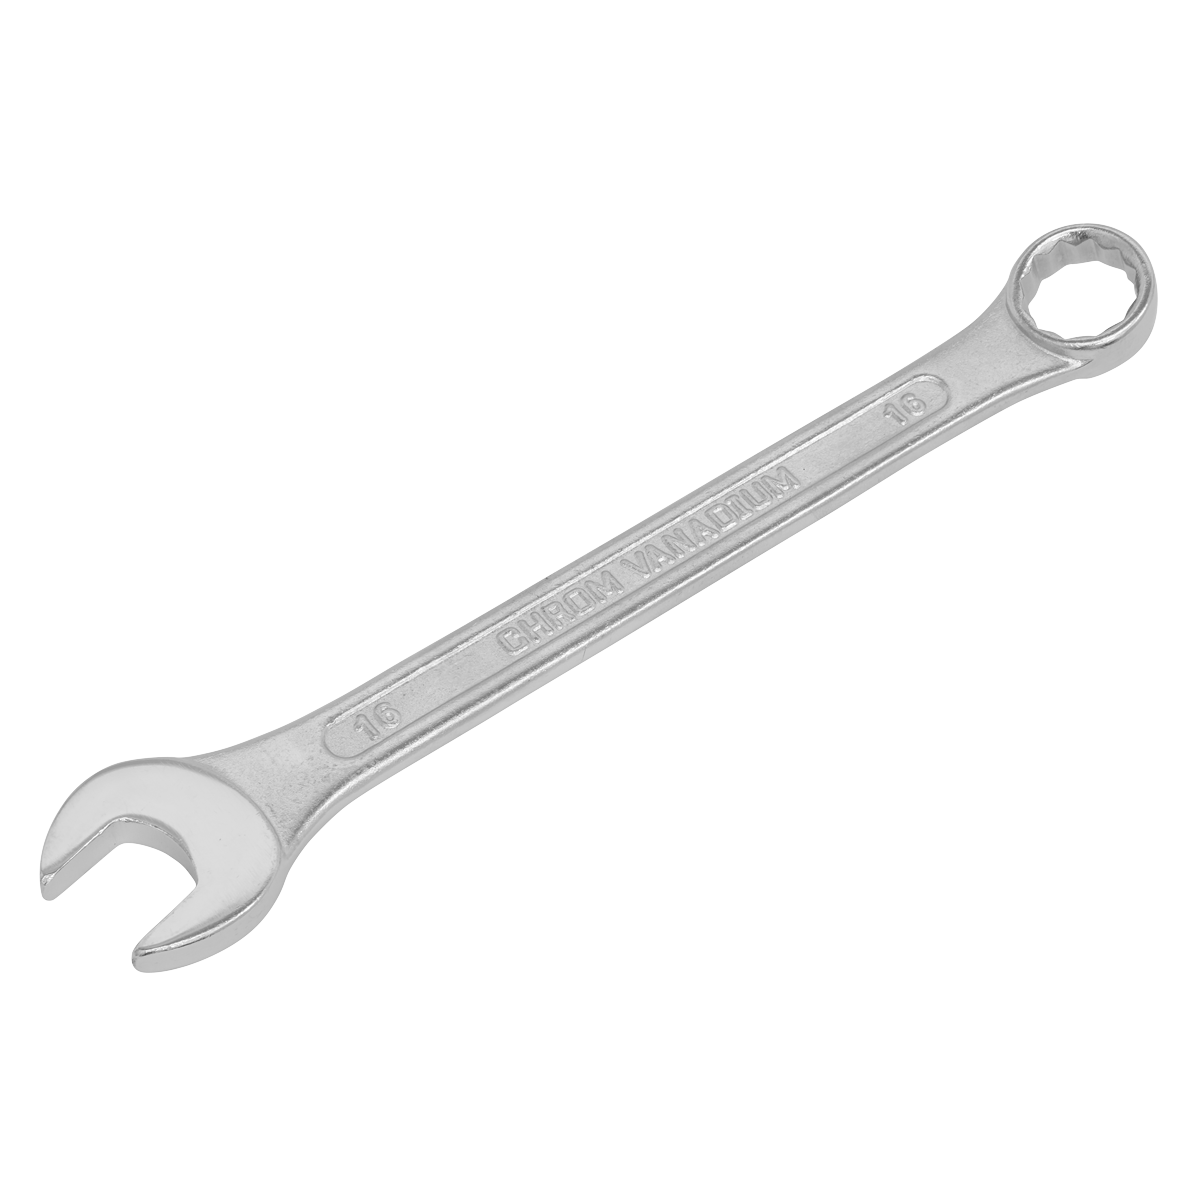 Sealey Combination Spanner 16mm S0416